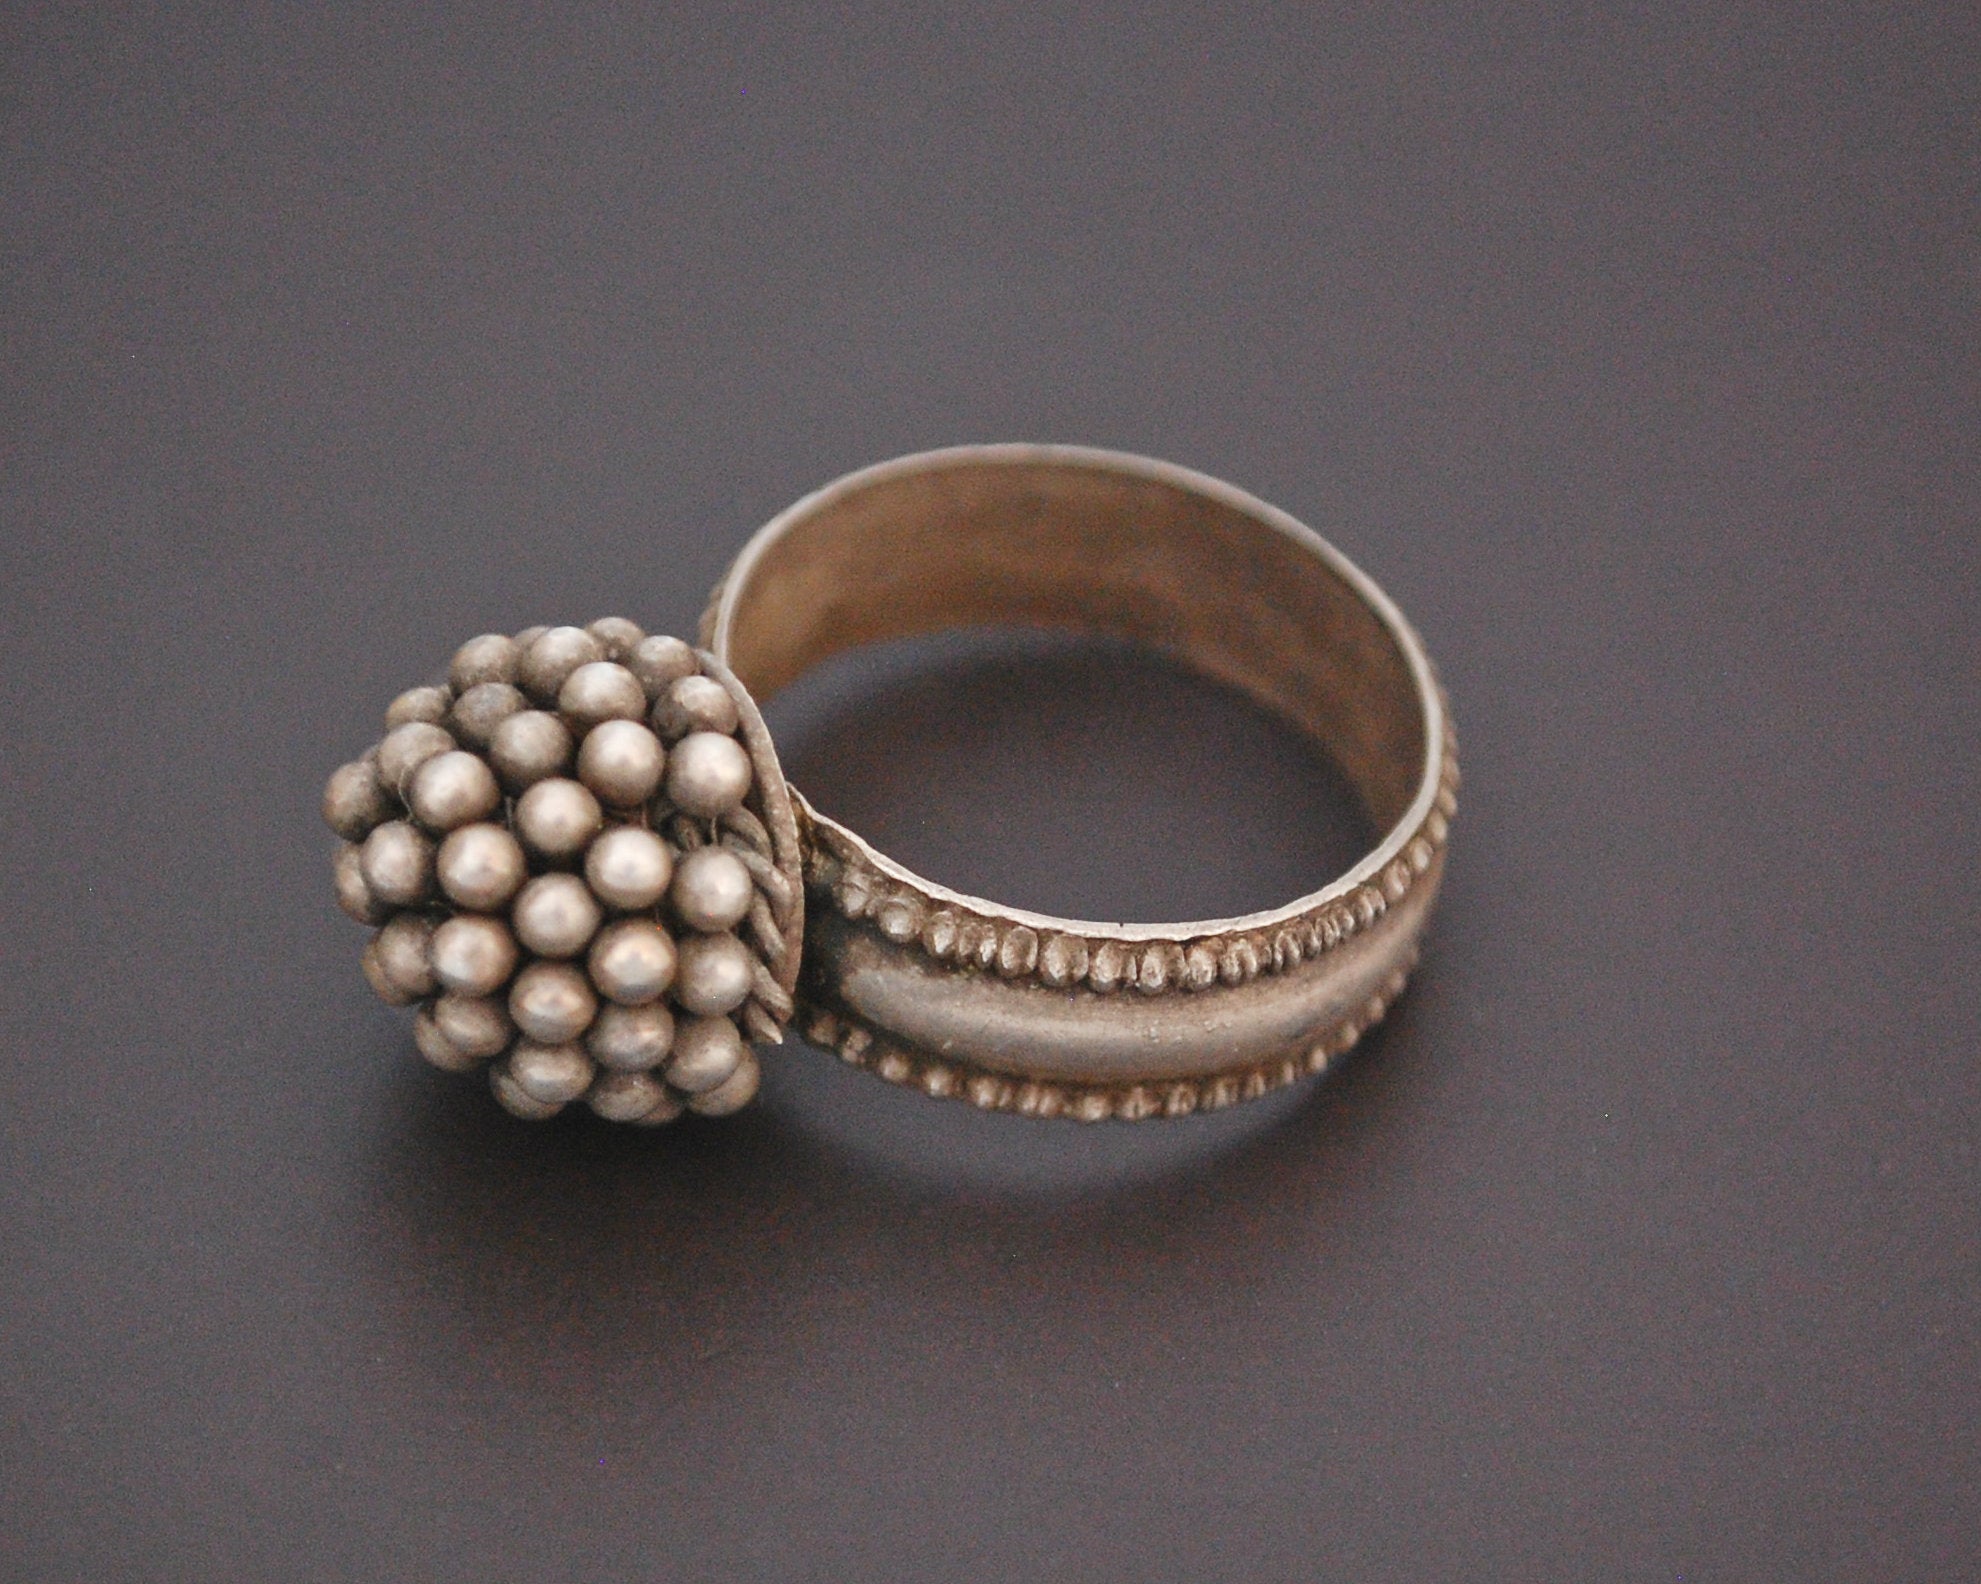 Tribal Rajasthani Silver Ring with Bells - Size 9